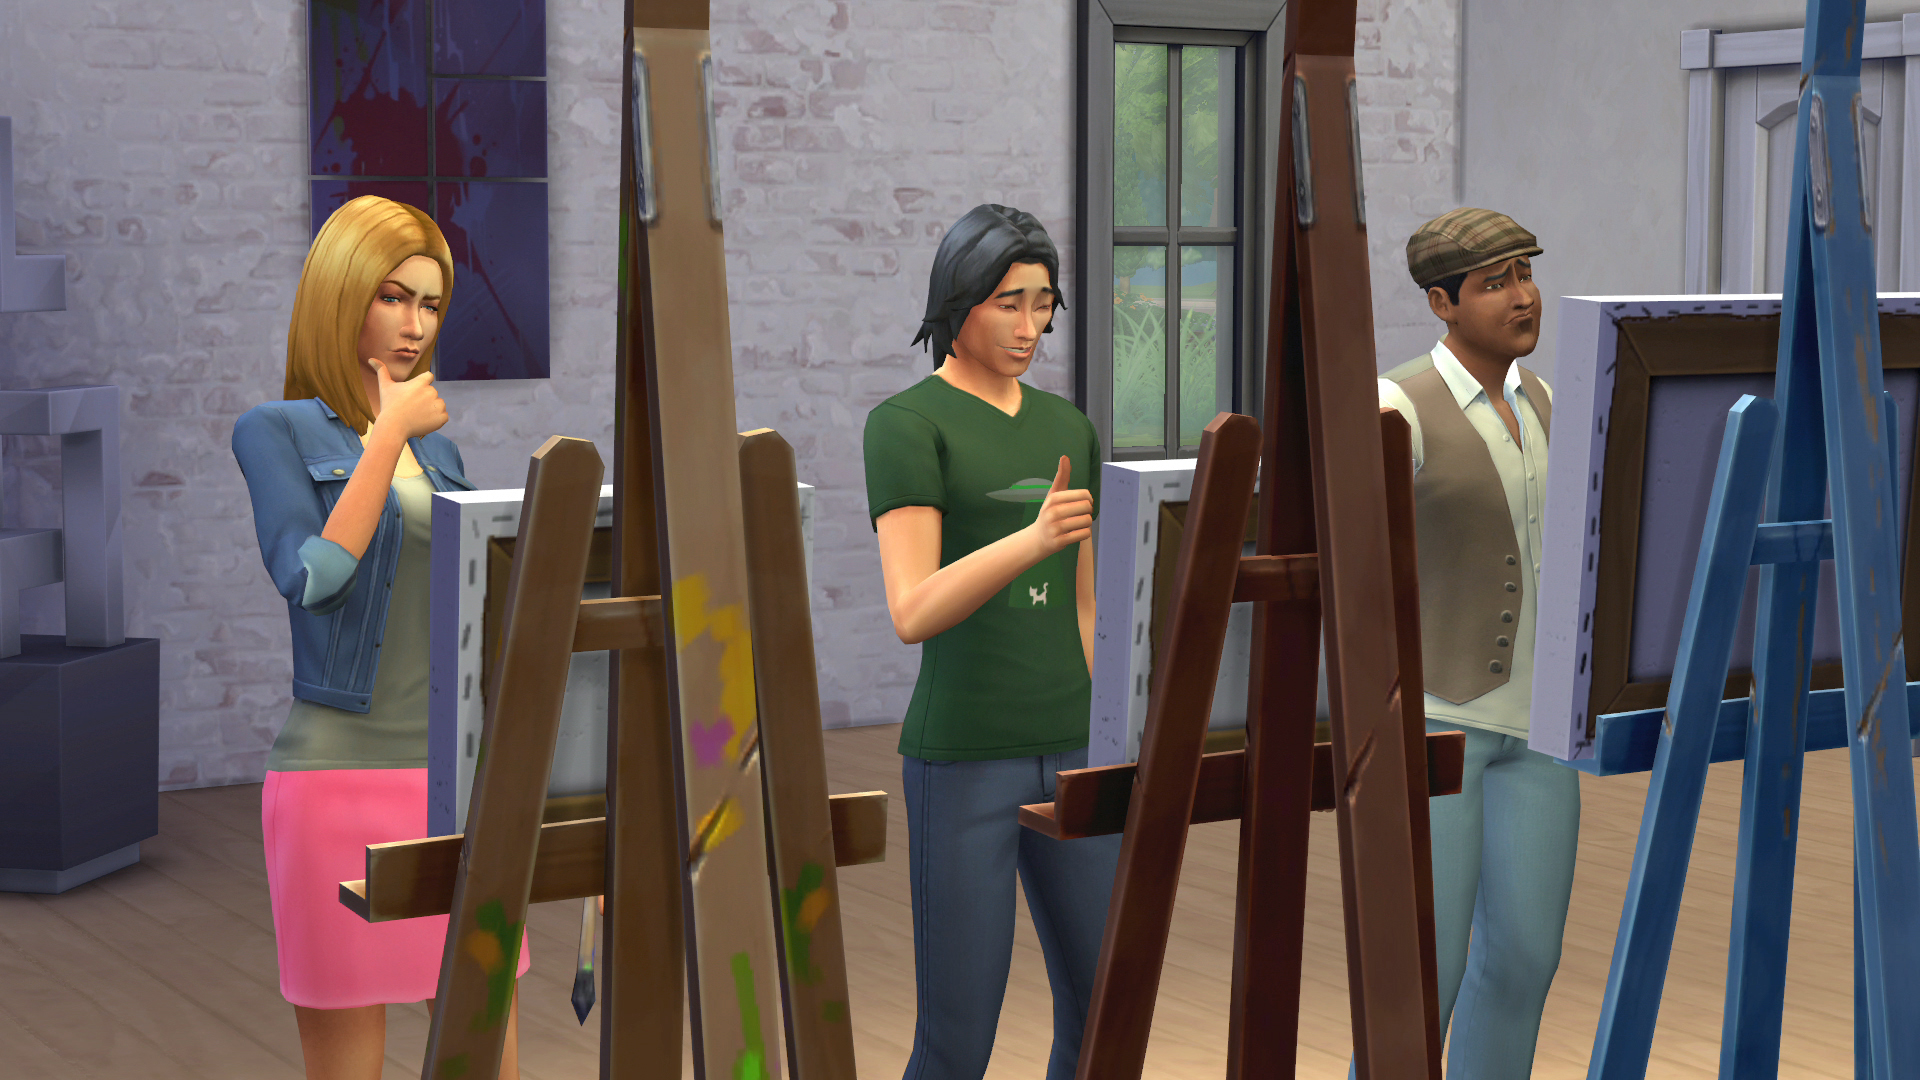 HD desktop wallpaper from The Sims 4 featuring three characters painting in an art studio.